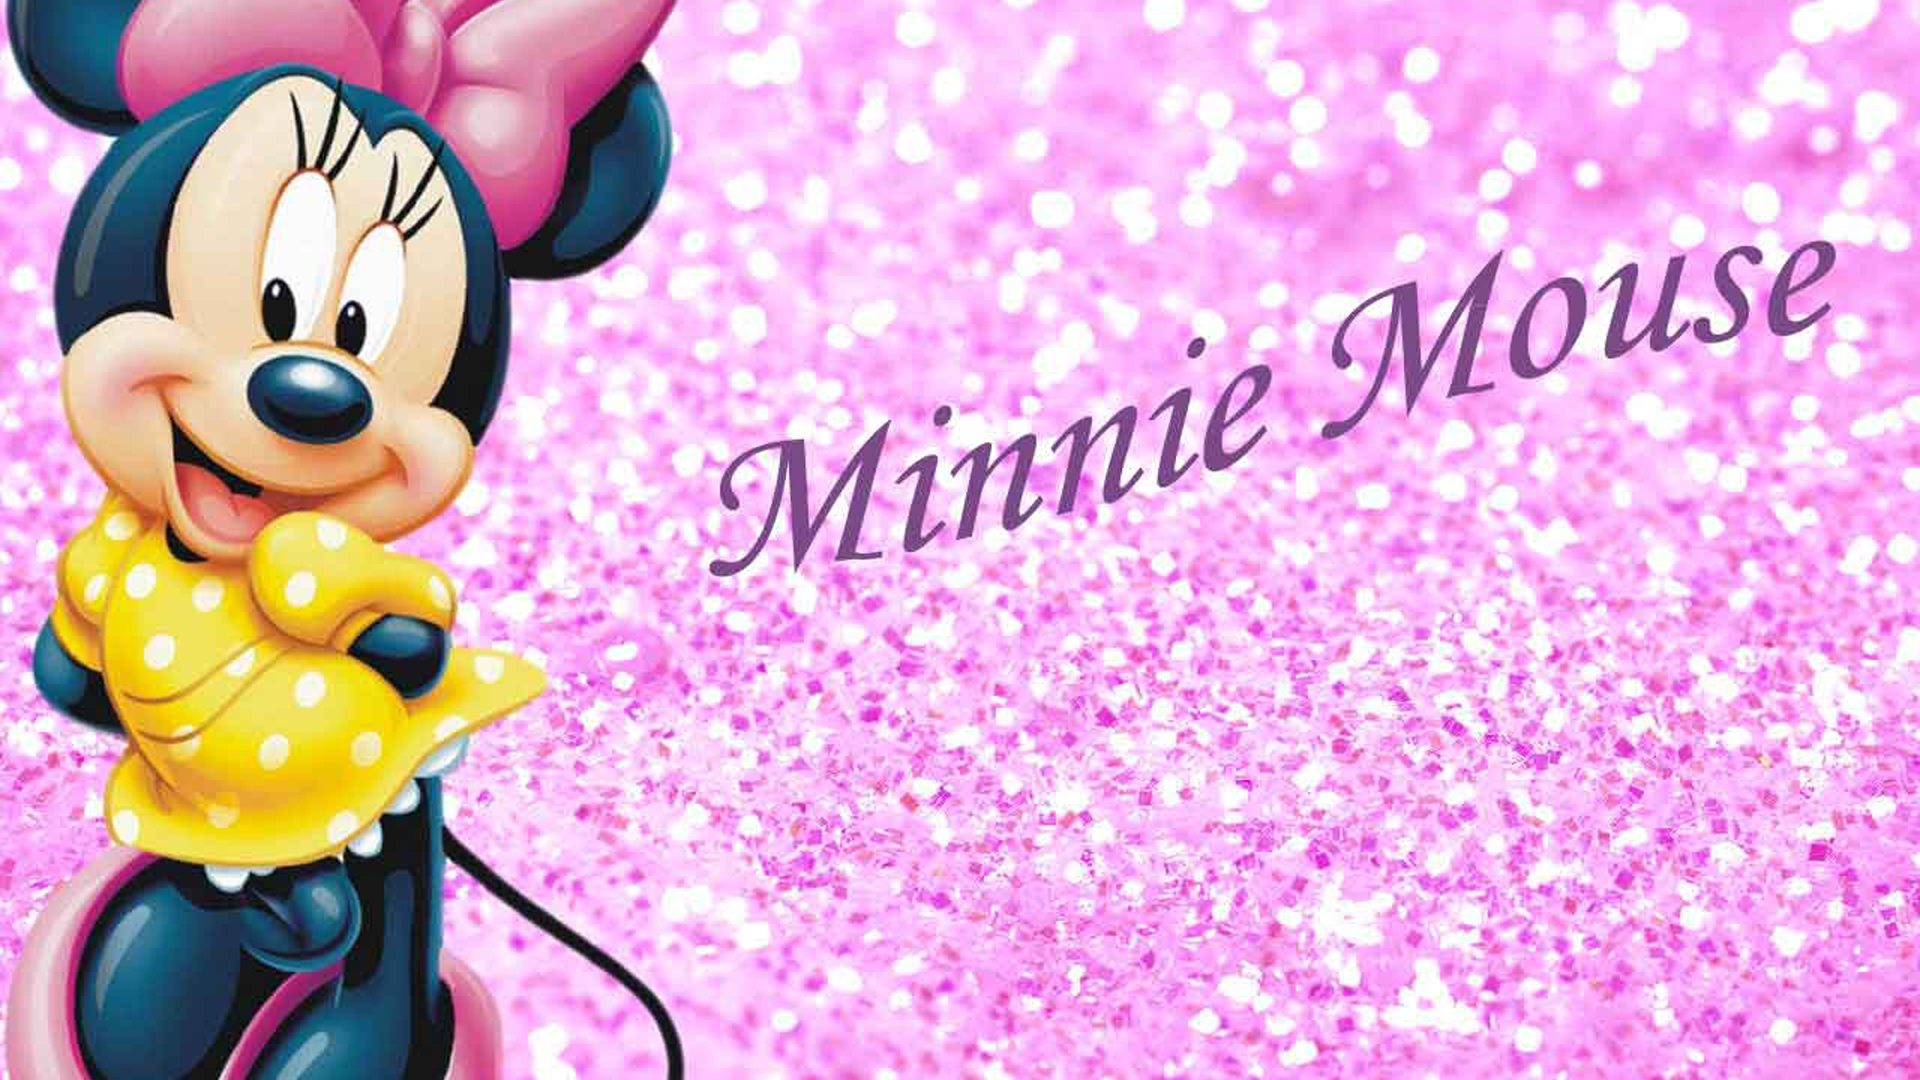 Minnie Mouse With Wallpaper Of Pink And White Glitters HD Minnie Mouse